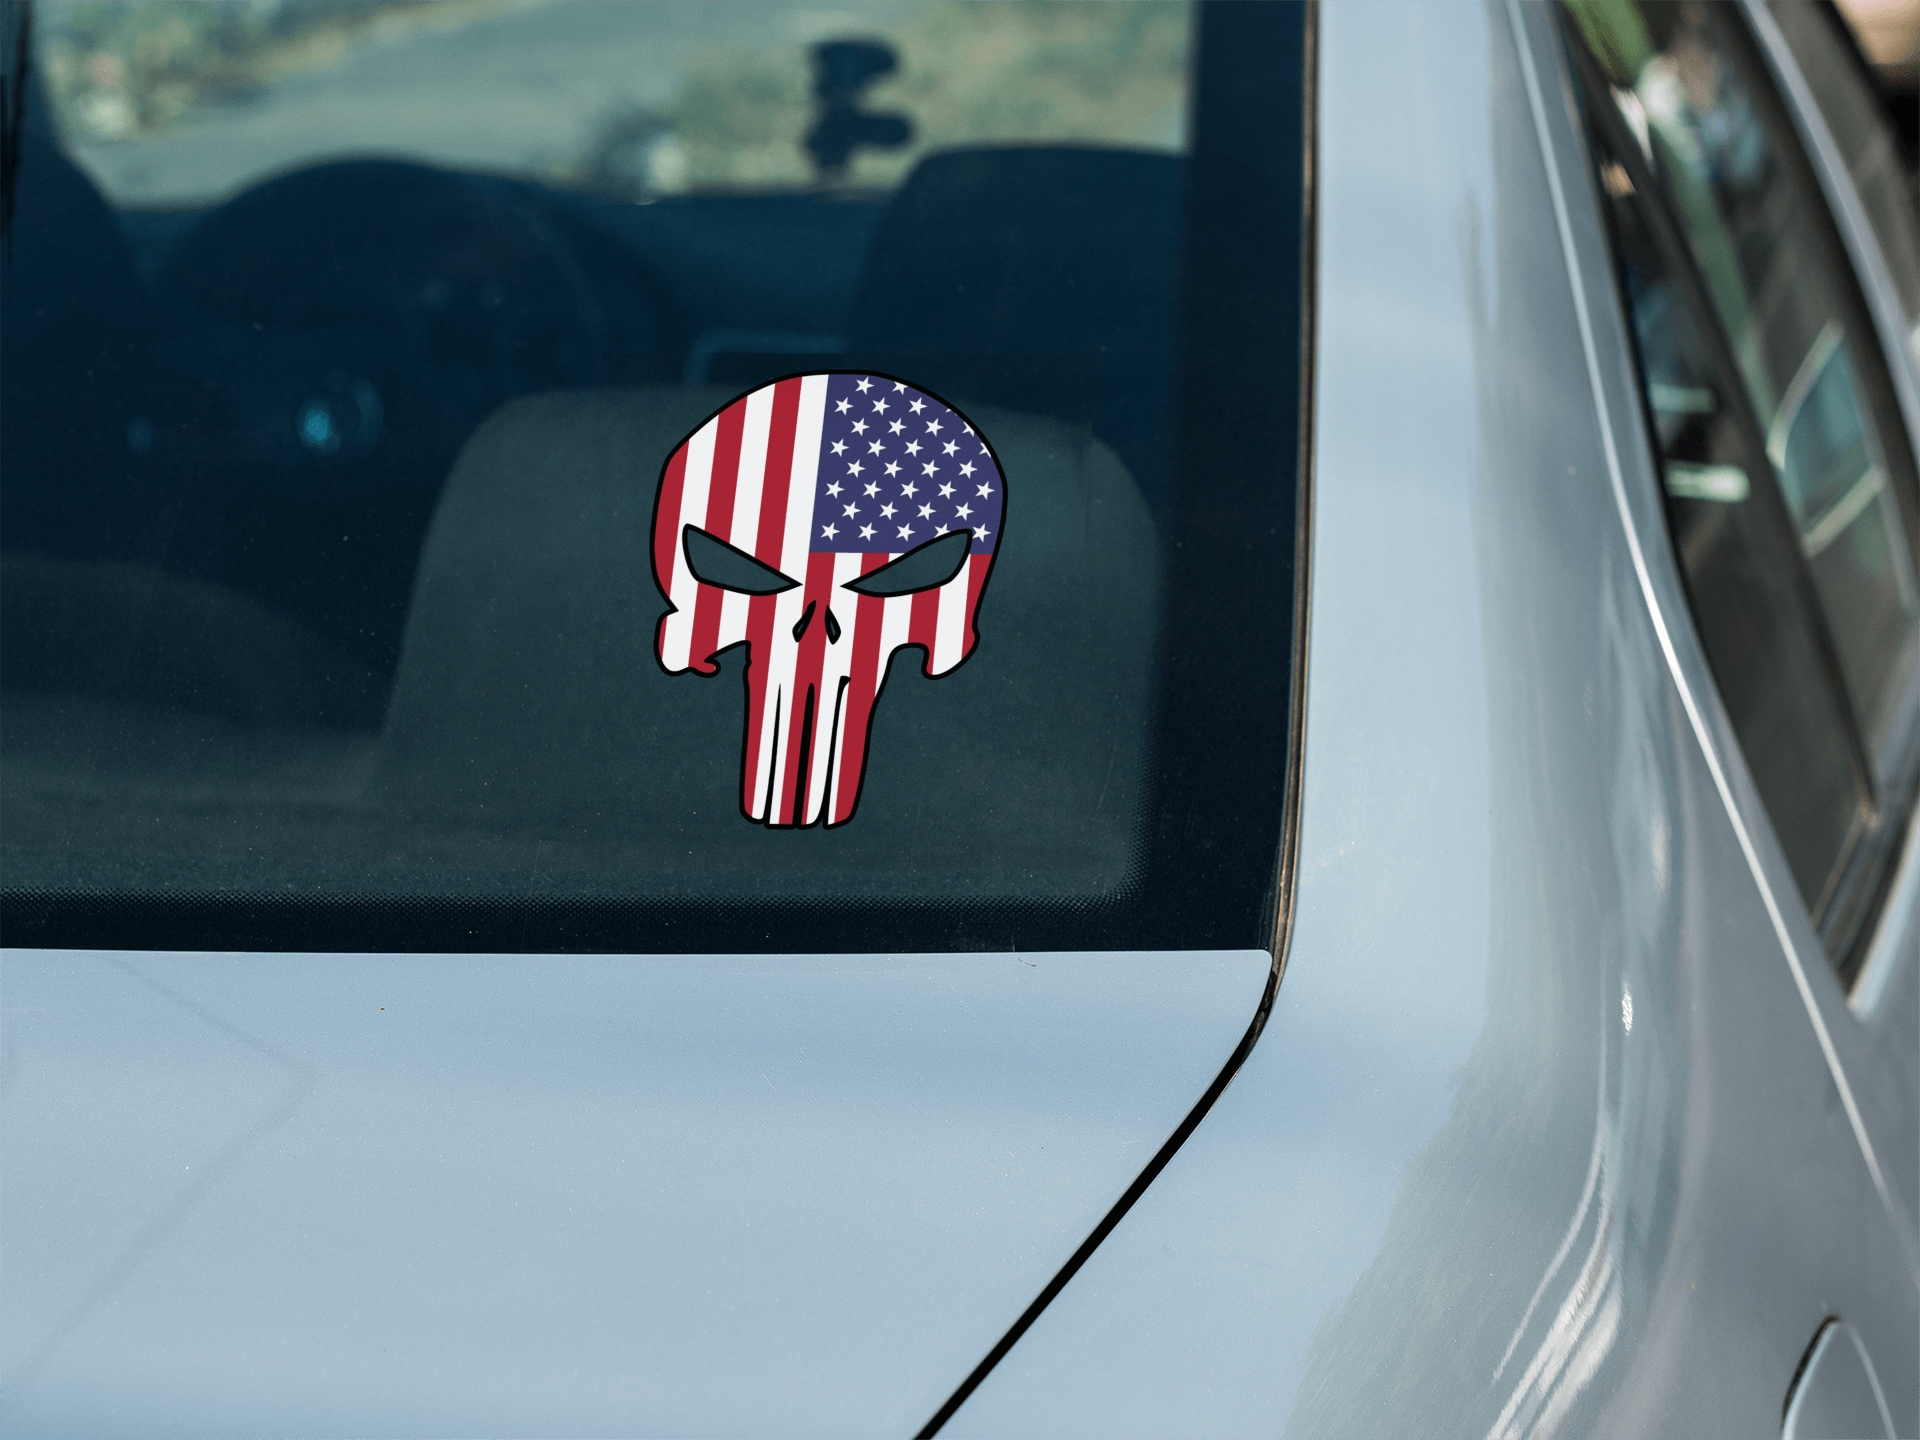 US Flag Patriot Skull - Bubble-free stickers 4th of july american flag American Made bubble free sticker car decal door decal freedom hand made Handmade liberty Made In America made in USA punisher skull skull sticker Small Business Made stickers US Flag Vinyl decals vinyl sticker water proof sticker window decal window sticker